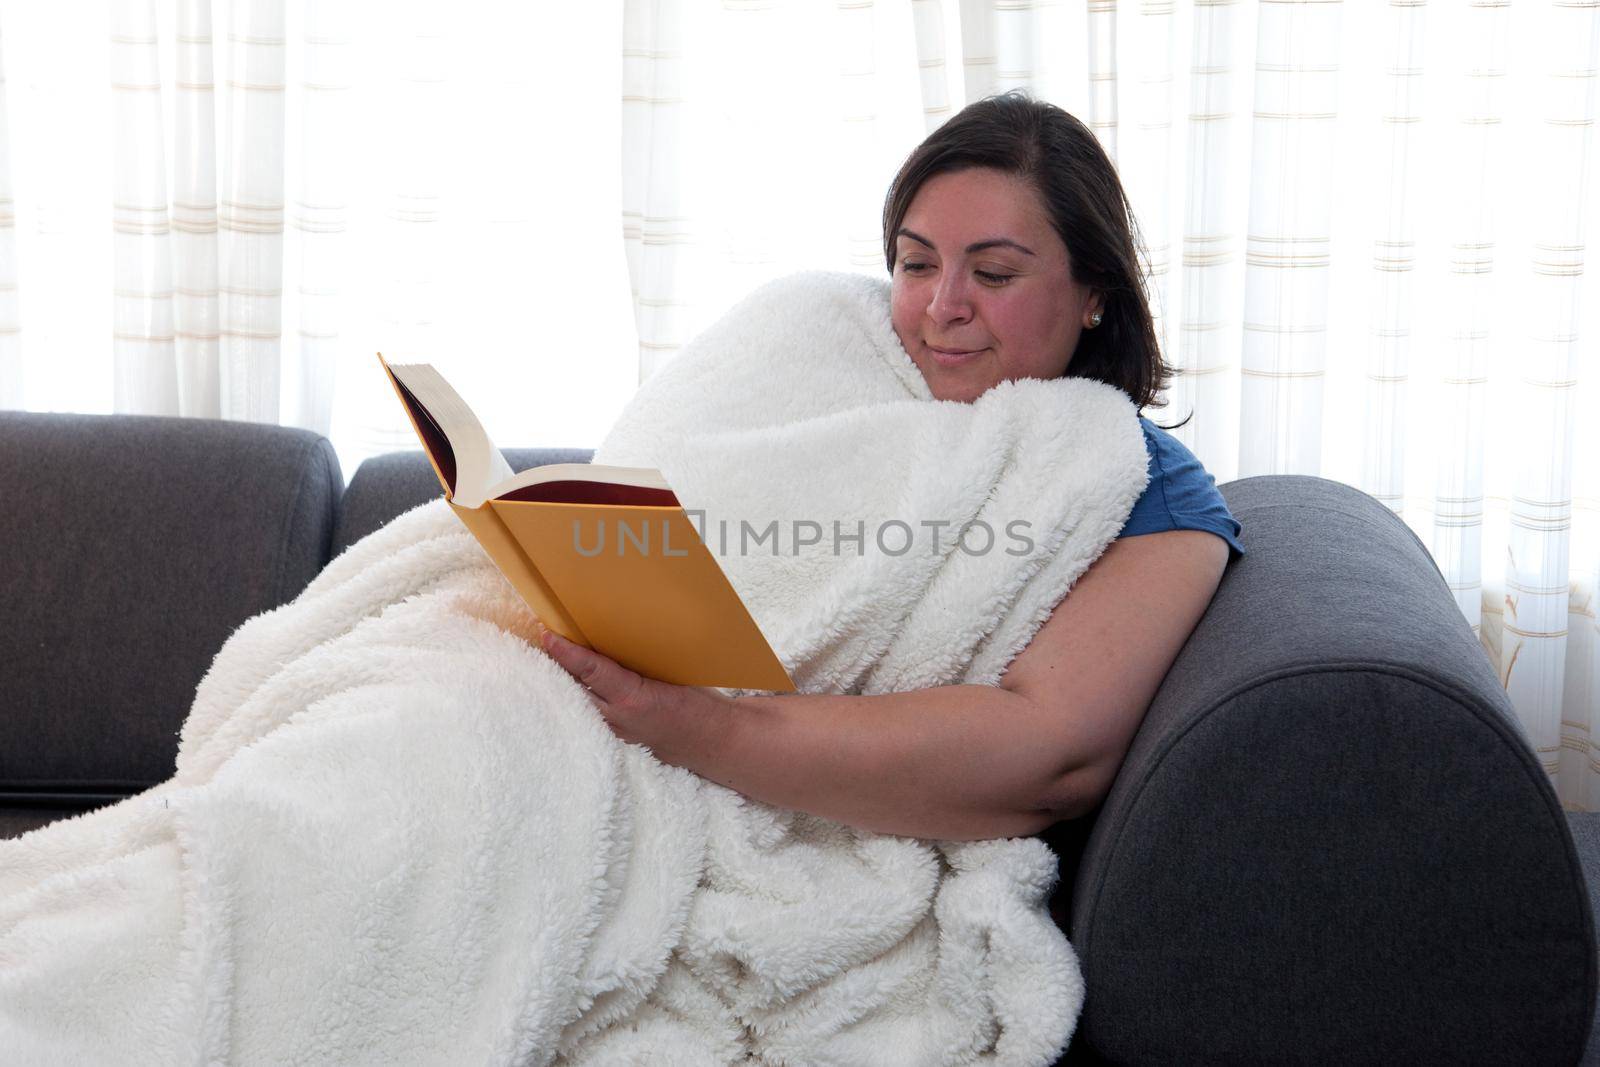 Woman smiles as she is comfortable at home with a blanket and a compelling story